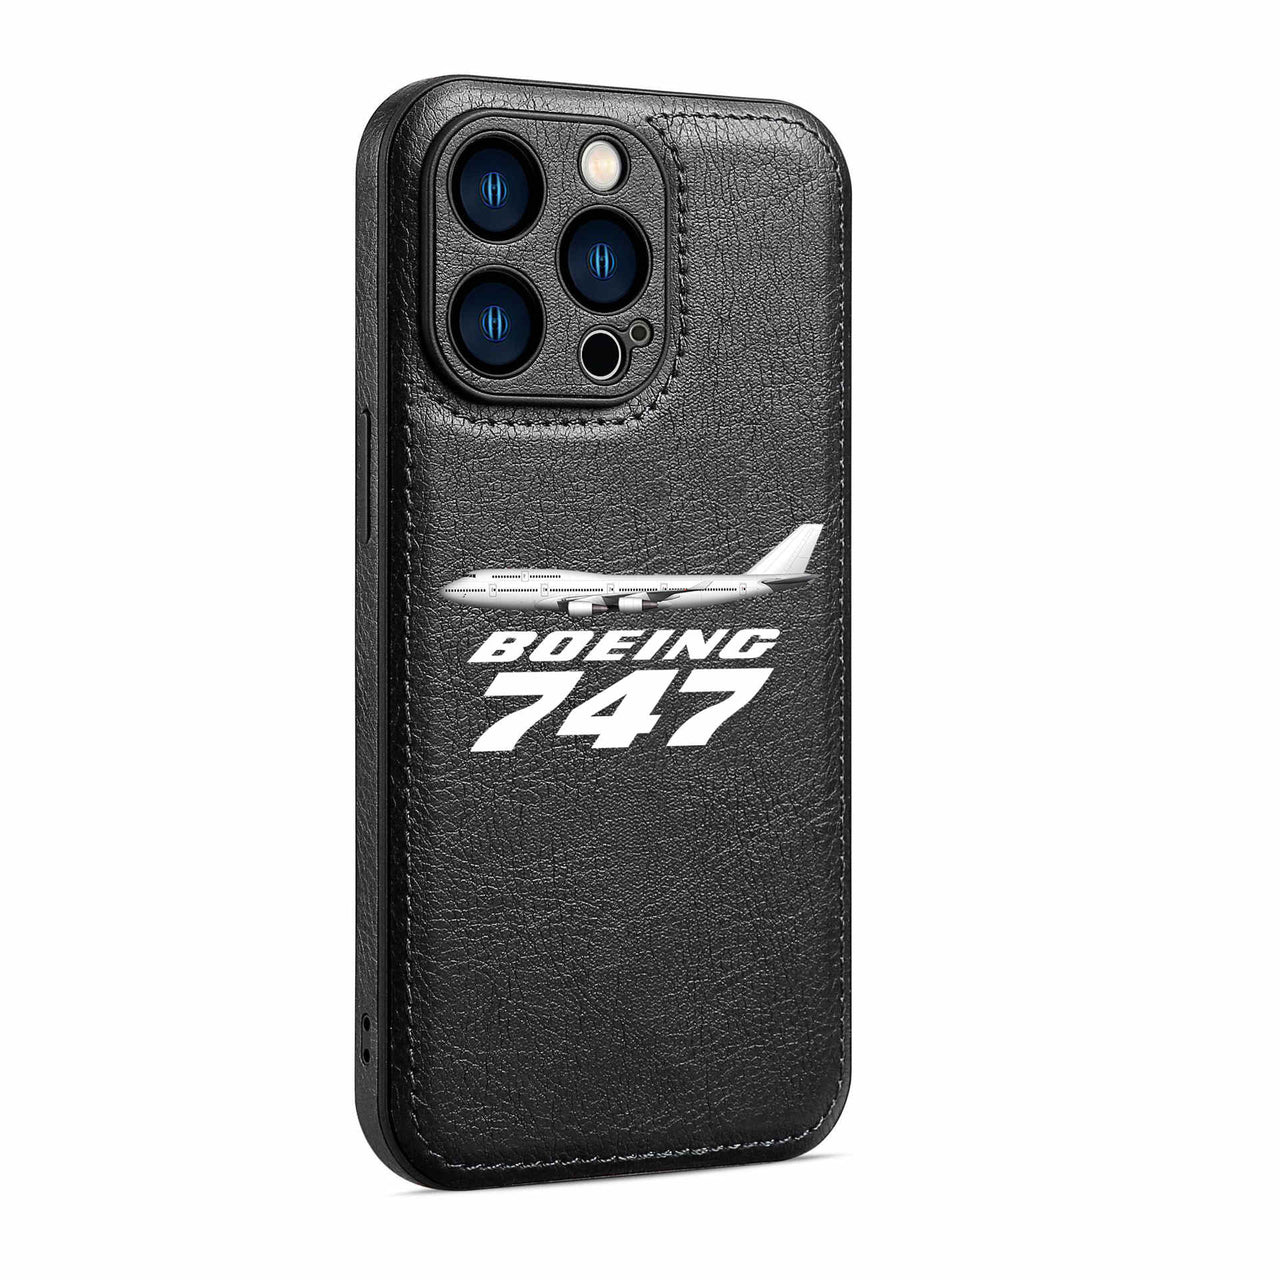 The Boeing 747 Designed Leather iPhone Cases